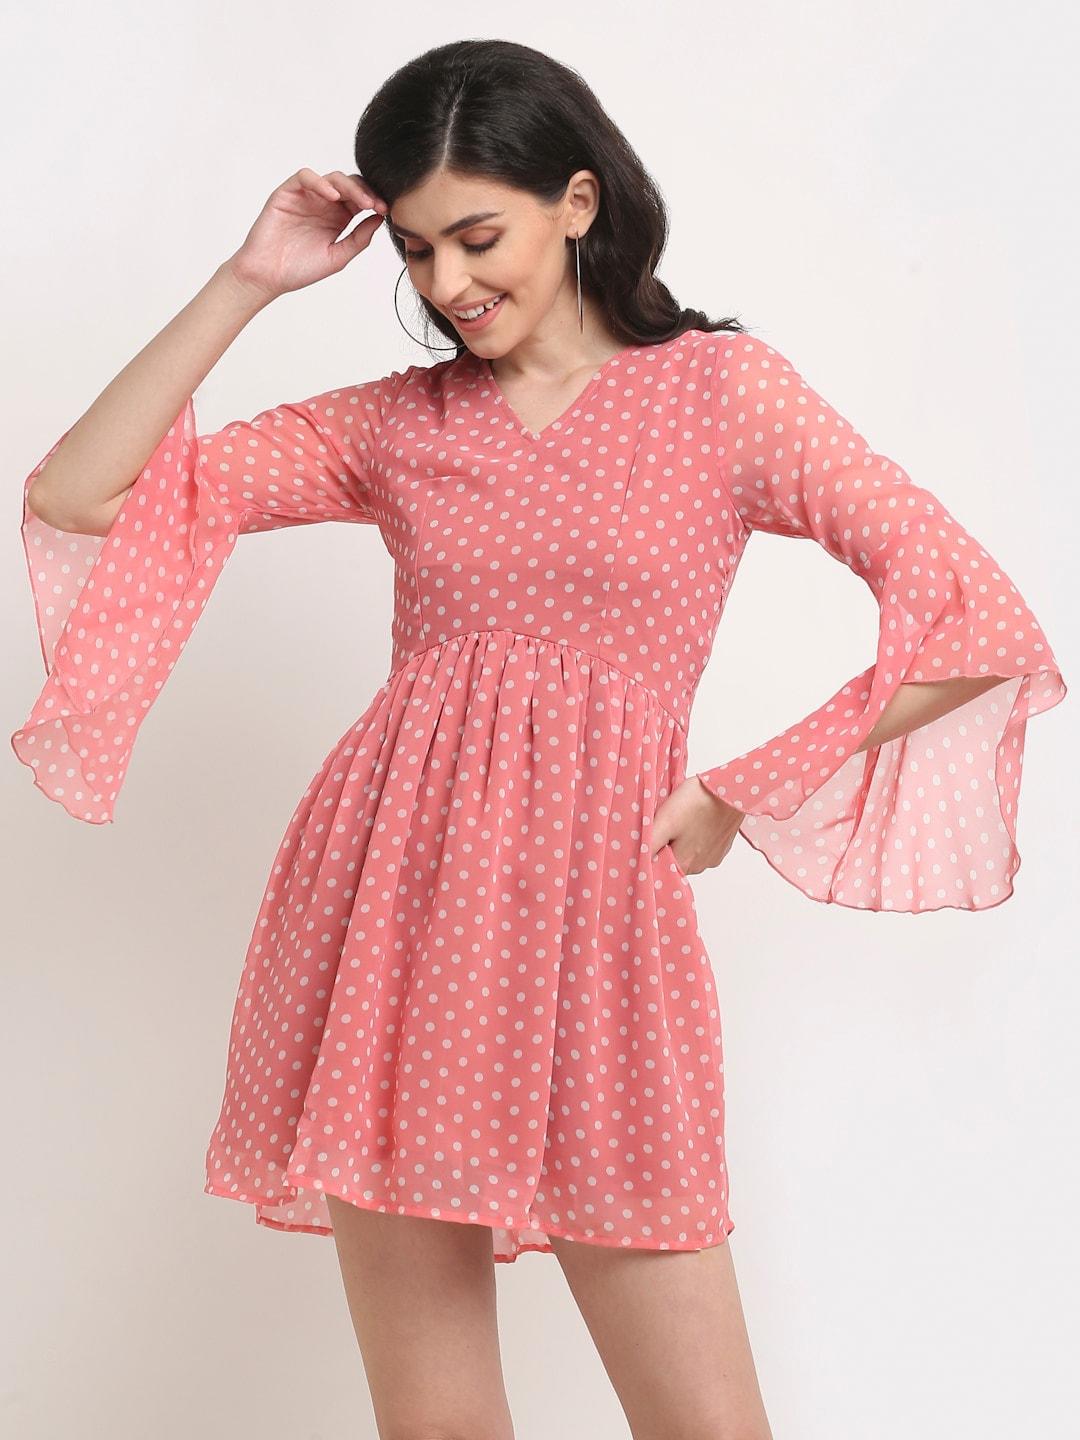 La Zoire Peach-Coloured & White Polka Dots Printed Bell Sleeves Fit & Flare Dress